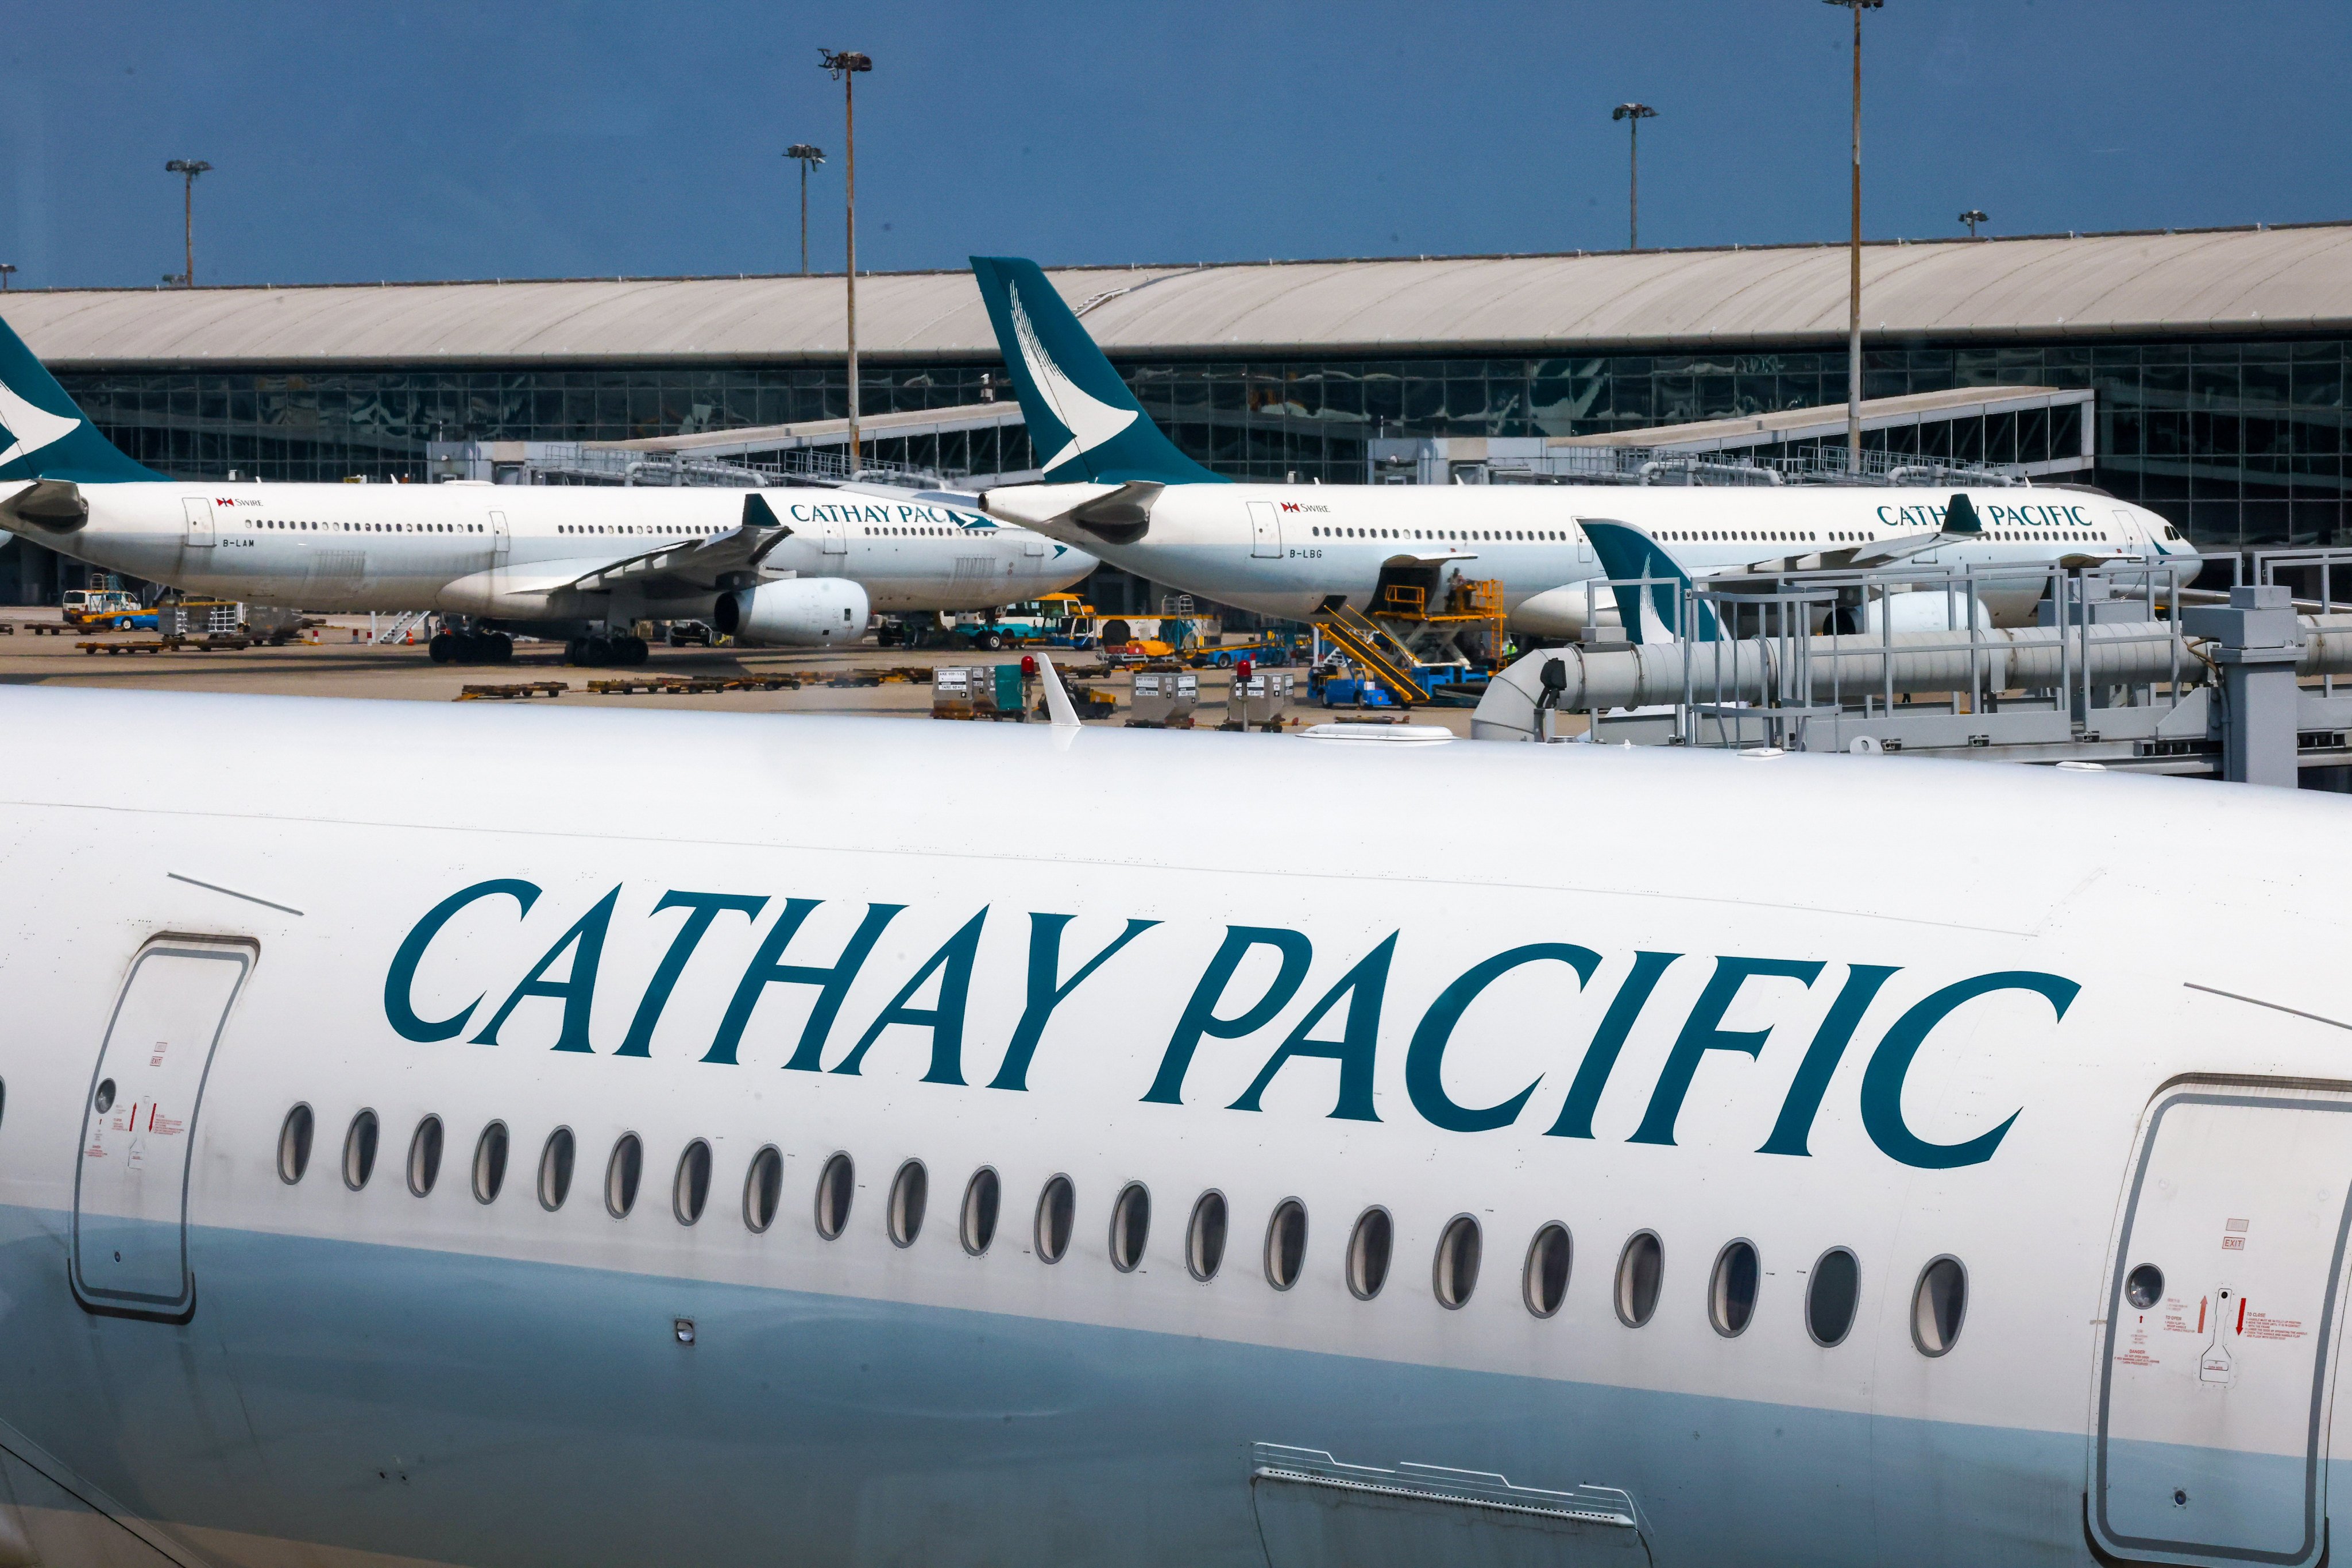 Cathay is struggling to meet expectations as it has not been able to deal with a shortfall of pilots, an insider says. Photo: Jonathan Wong